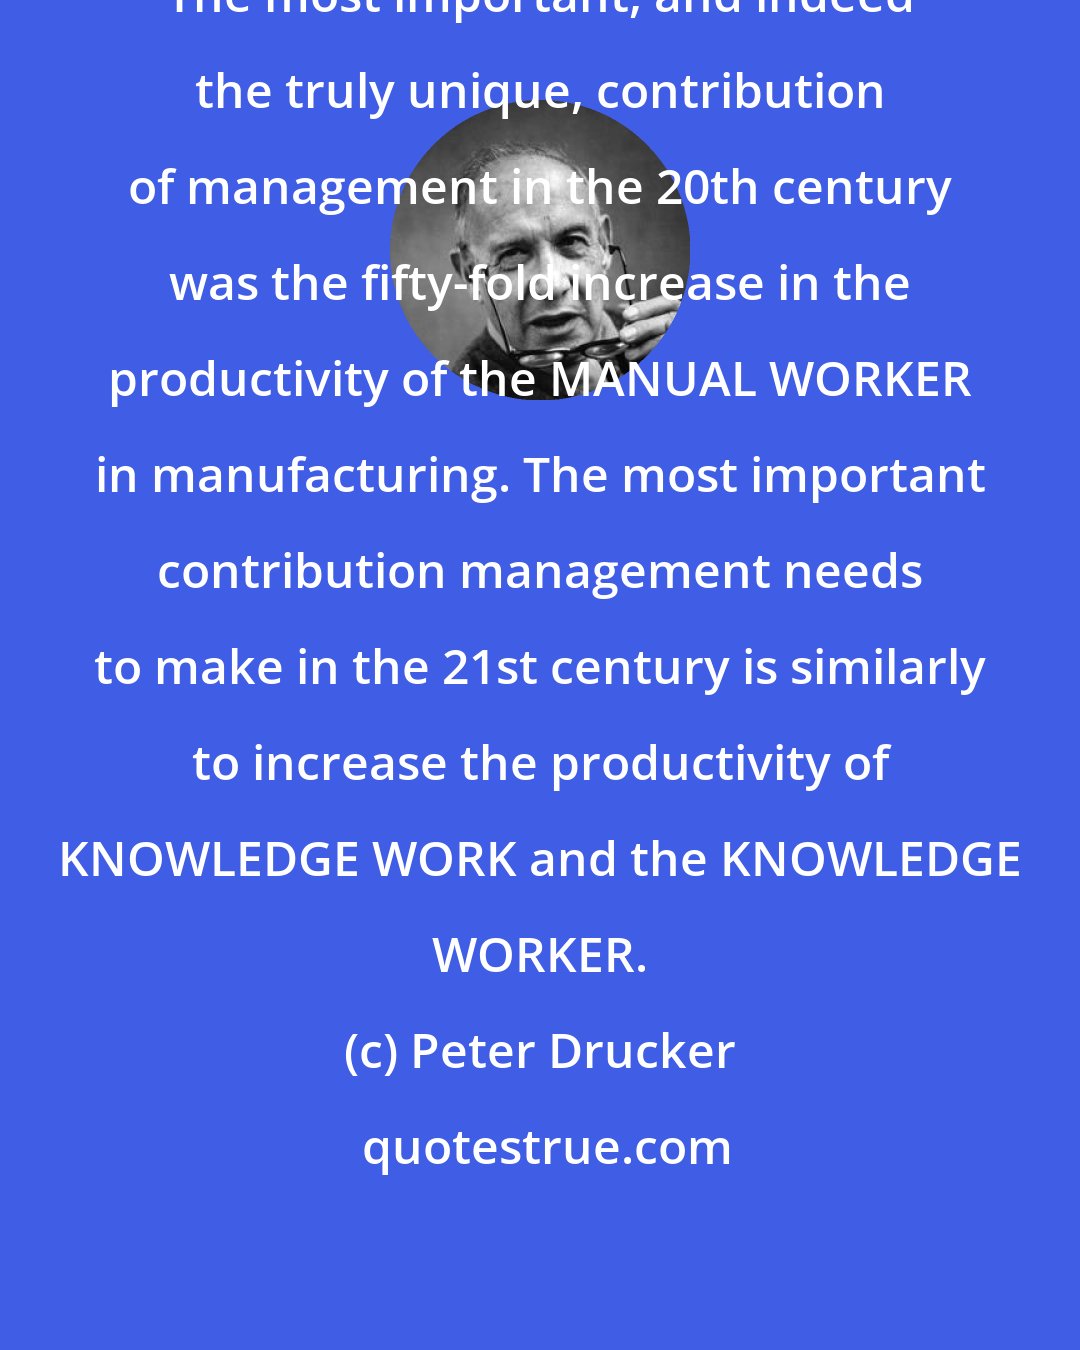 Peter Drucker: The most important, and indeed the truly unique, contribution of management in the 20th century was the fifty-fold increase in the productivity of the MANUAL WORKER in manufacturing. The most important contribution management needs to make in the 21st century is similarly to increase the productivity of KNOWLEDGE WORK and the KNOWLEDGE WORKER.